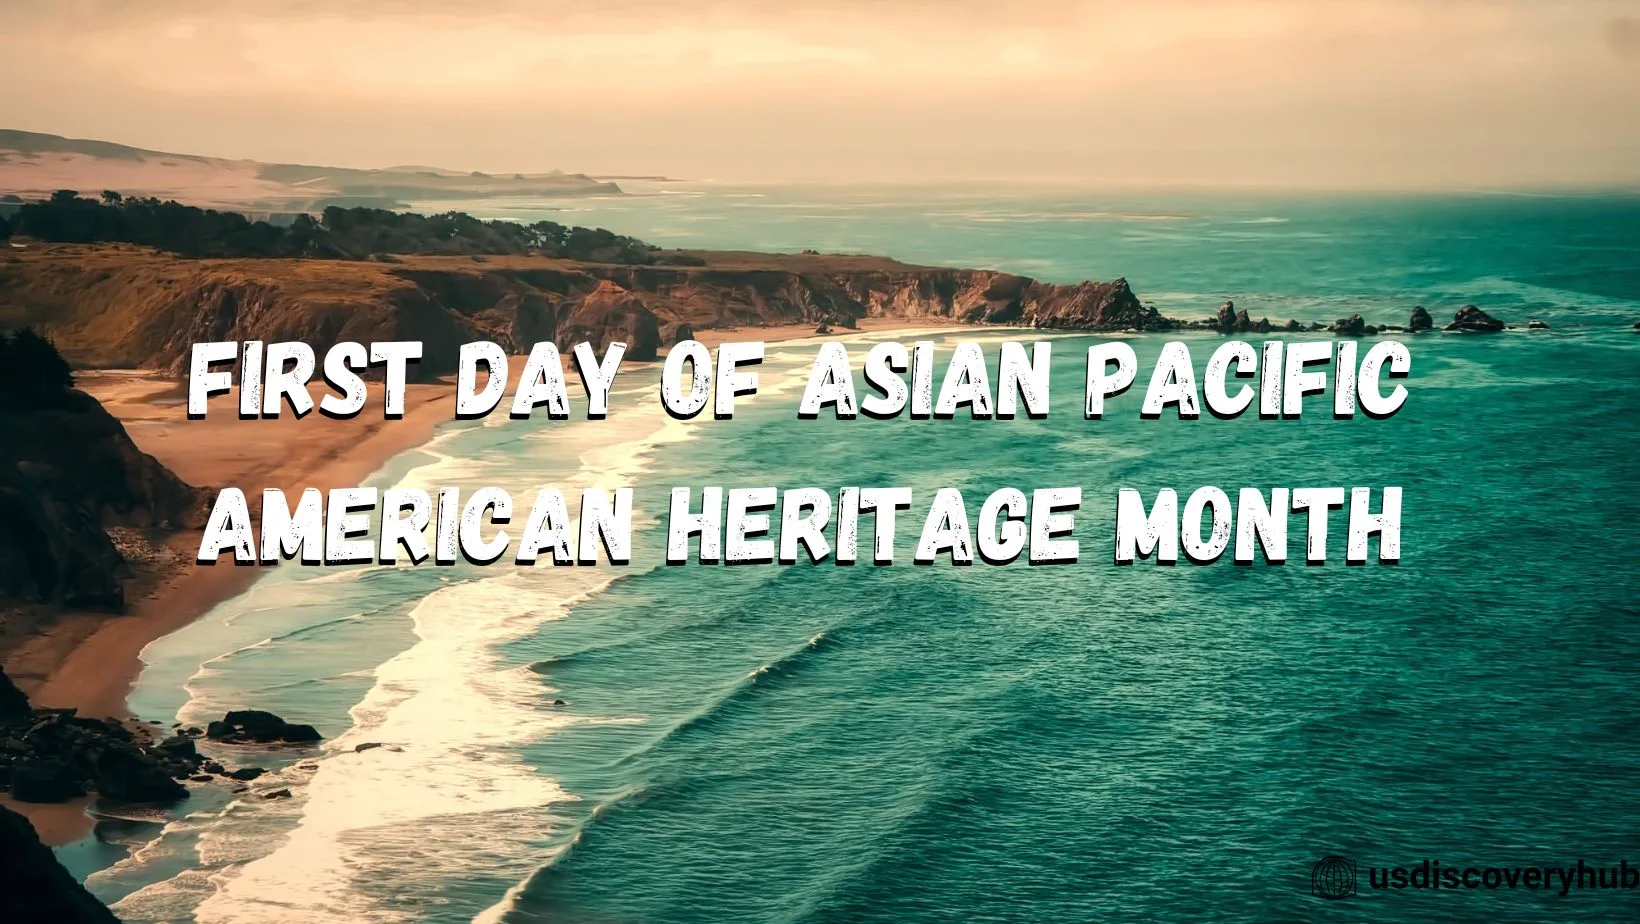 First day of Asian Pacific American Heritage Month images